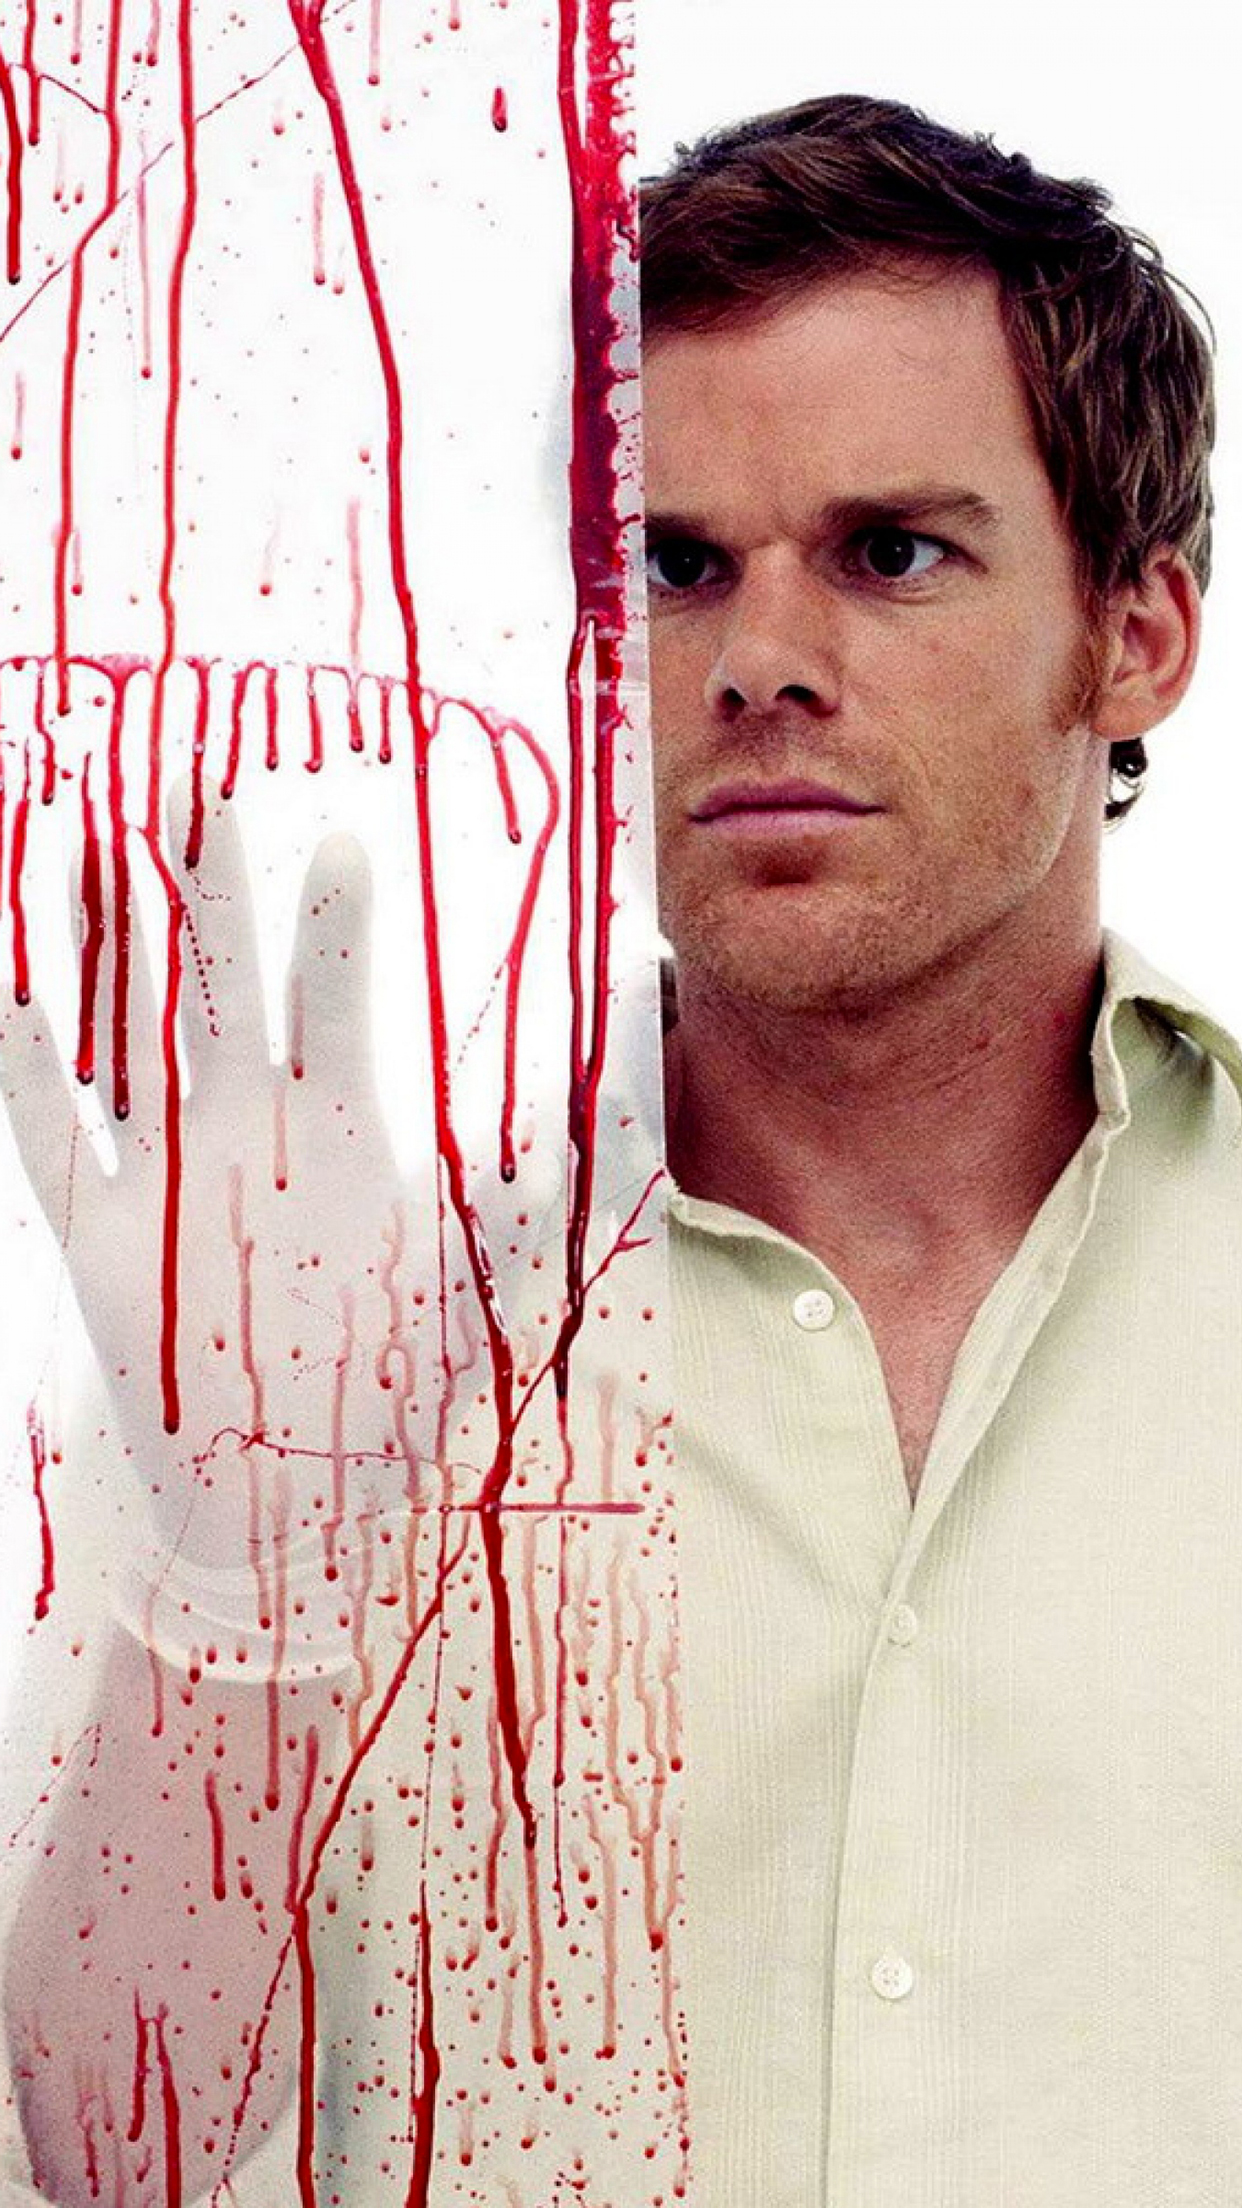 Dexter blood wallpaper for iphone pro max x